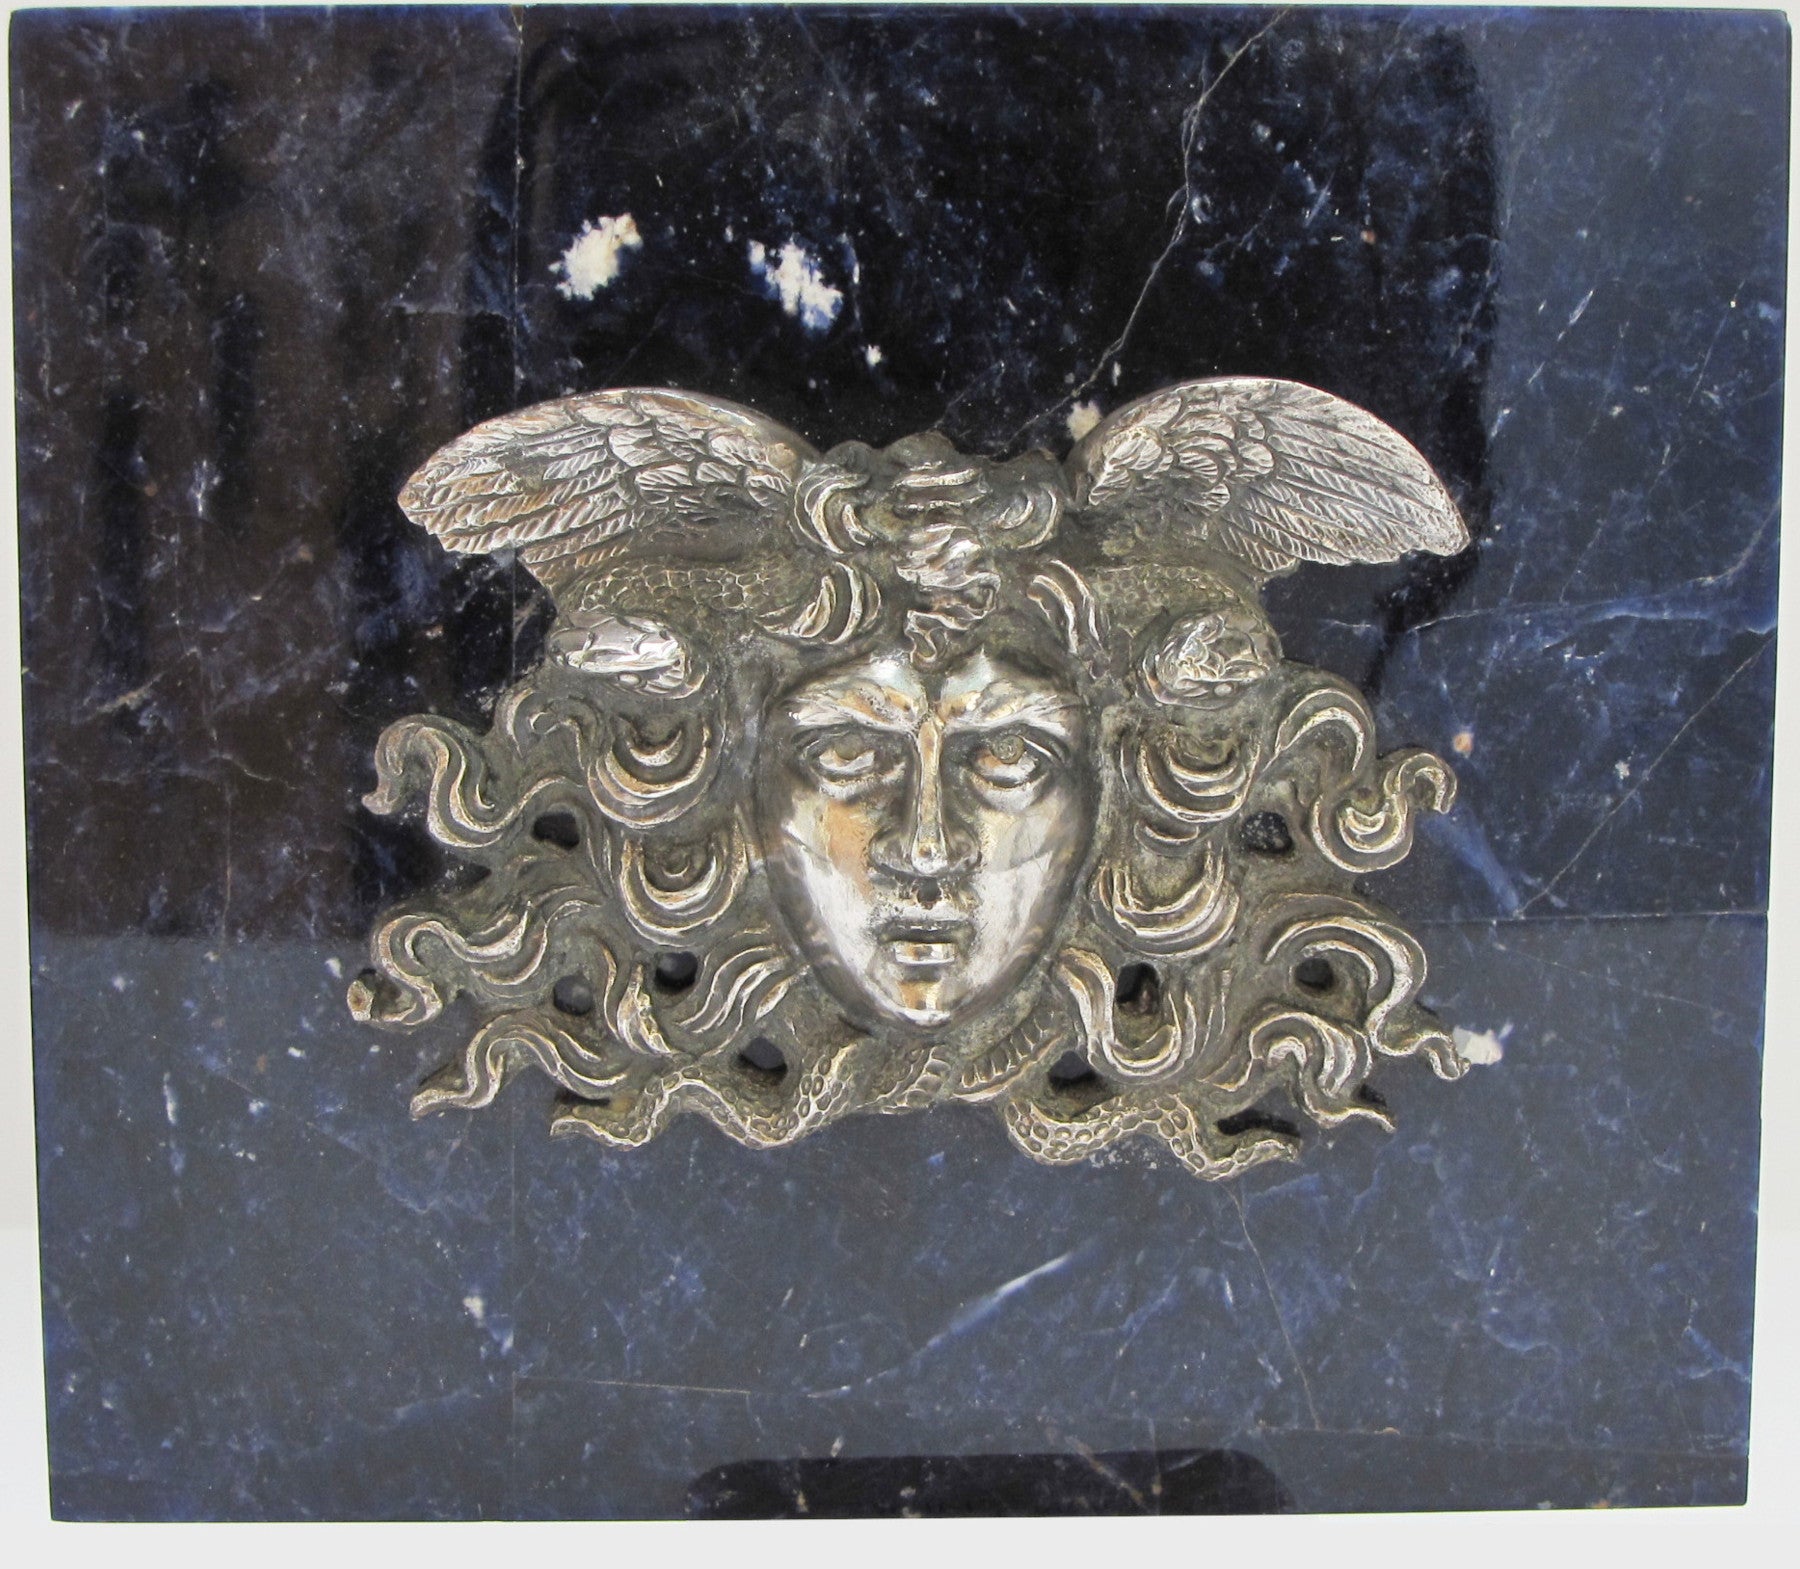 medusa head paperweight, 800/1000 silver, weight about 548 g. (19.33 oz)), size 100x110x30 mm